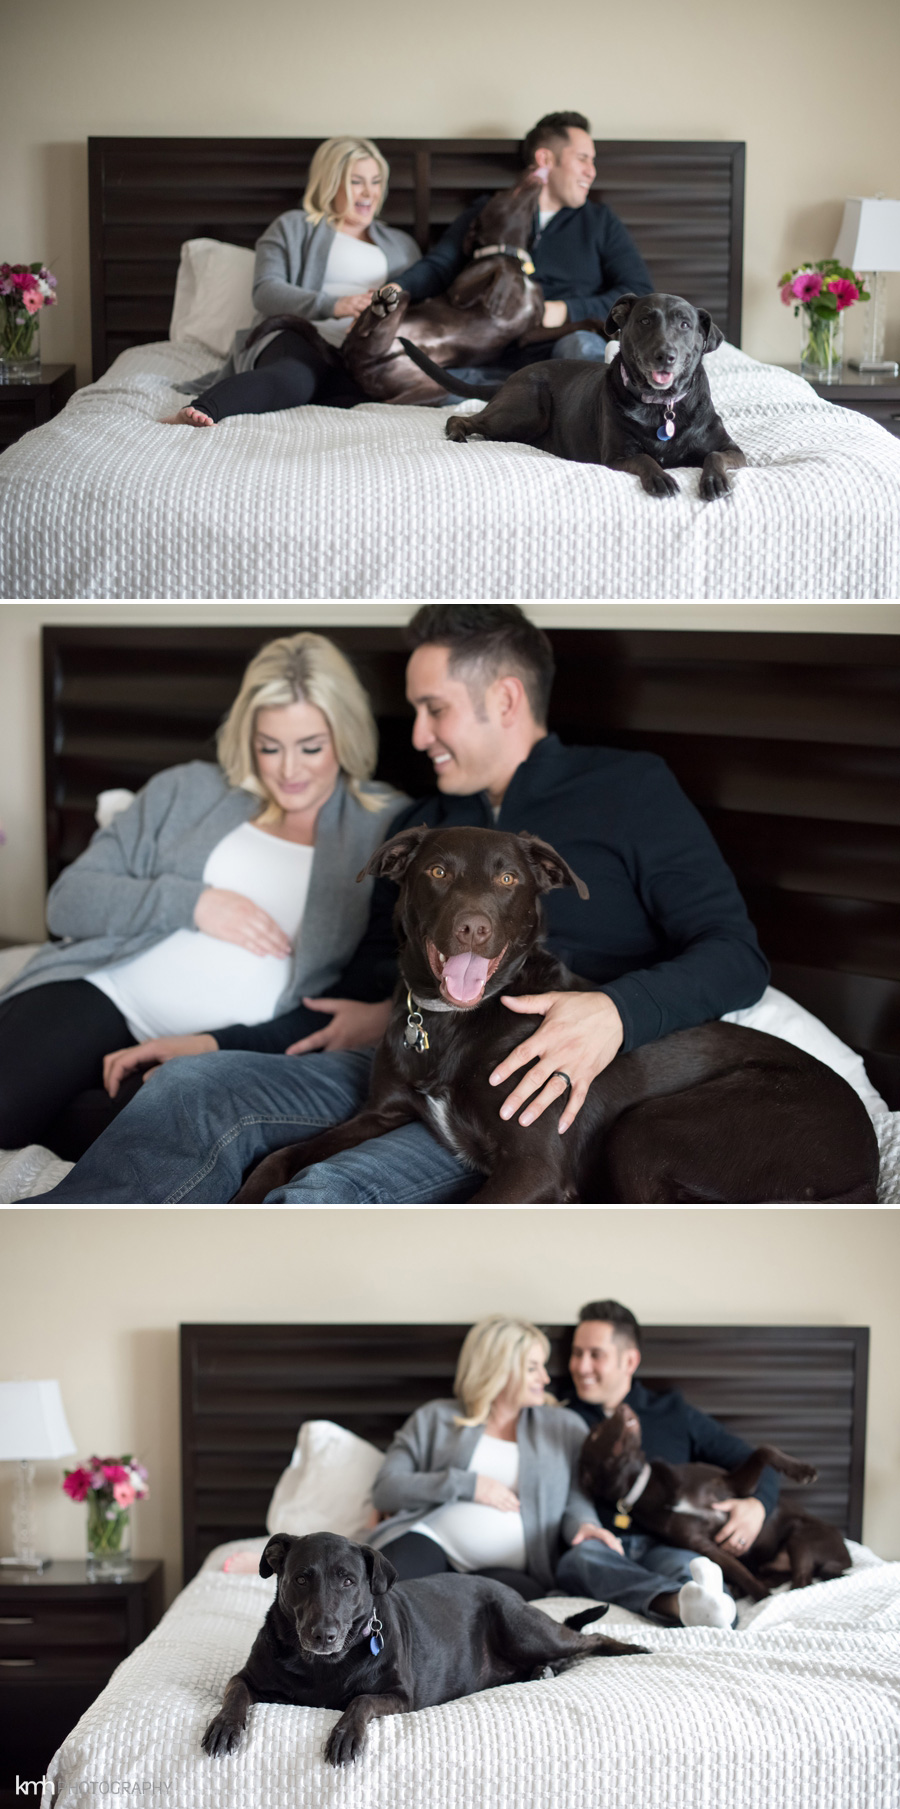 Las Vegas Maternity Photoshoot In Home | KMH Photography 